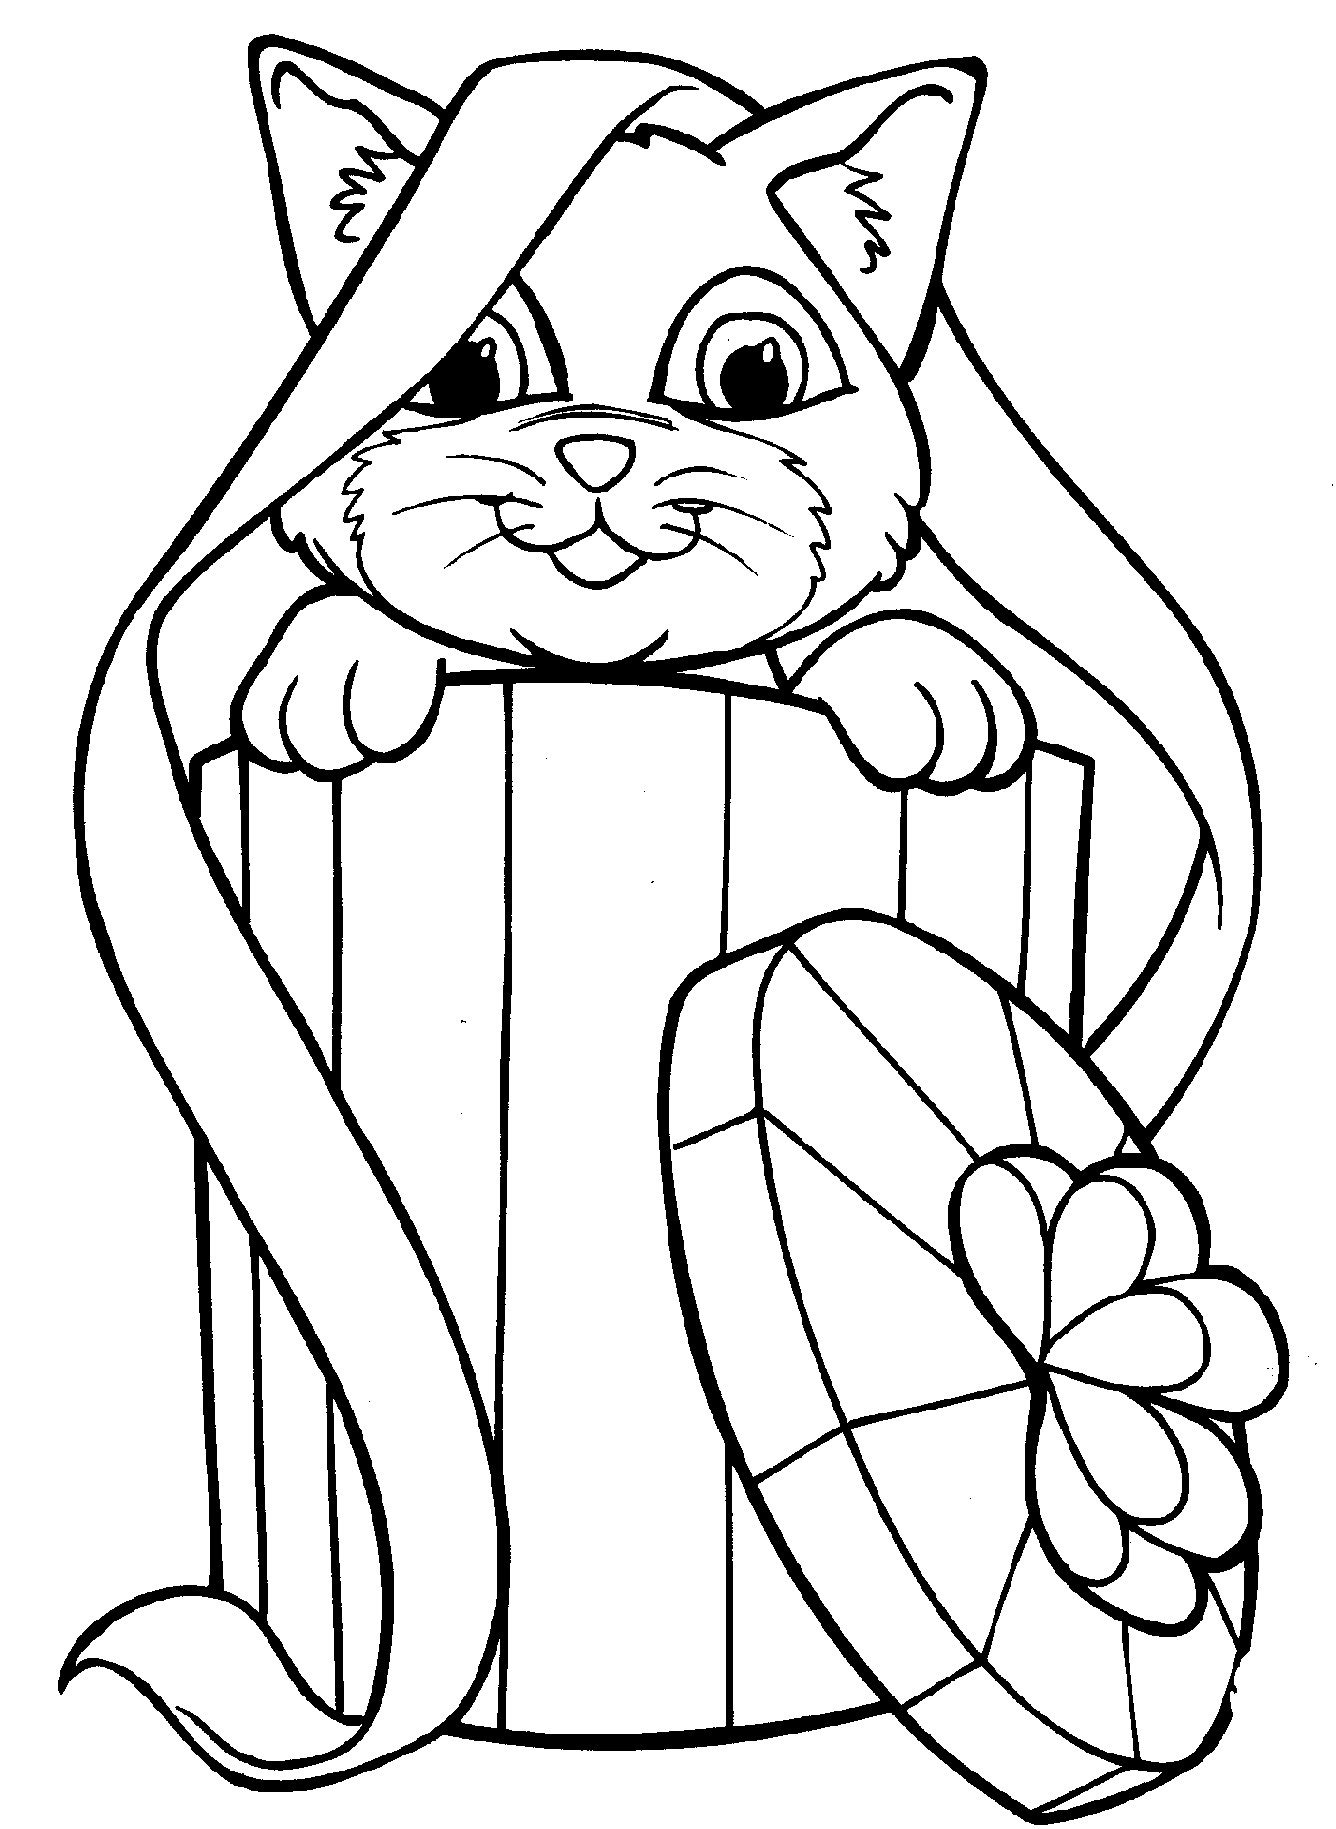 Litten Coloring Pages
 Free Printable Kitten Coloring Pages For Kids Best